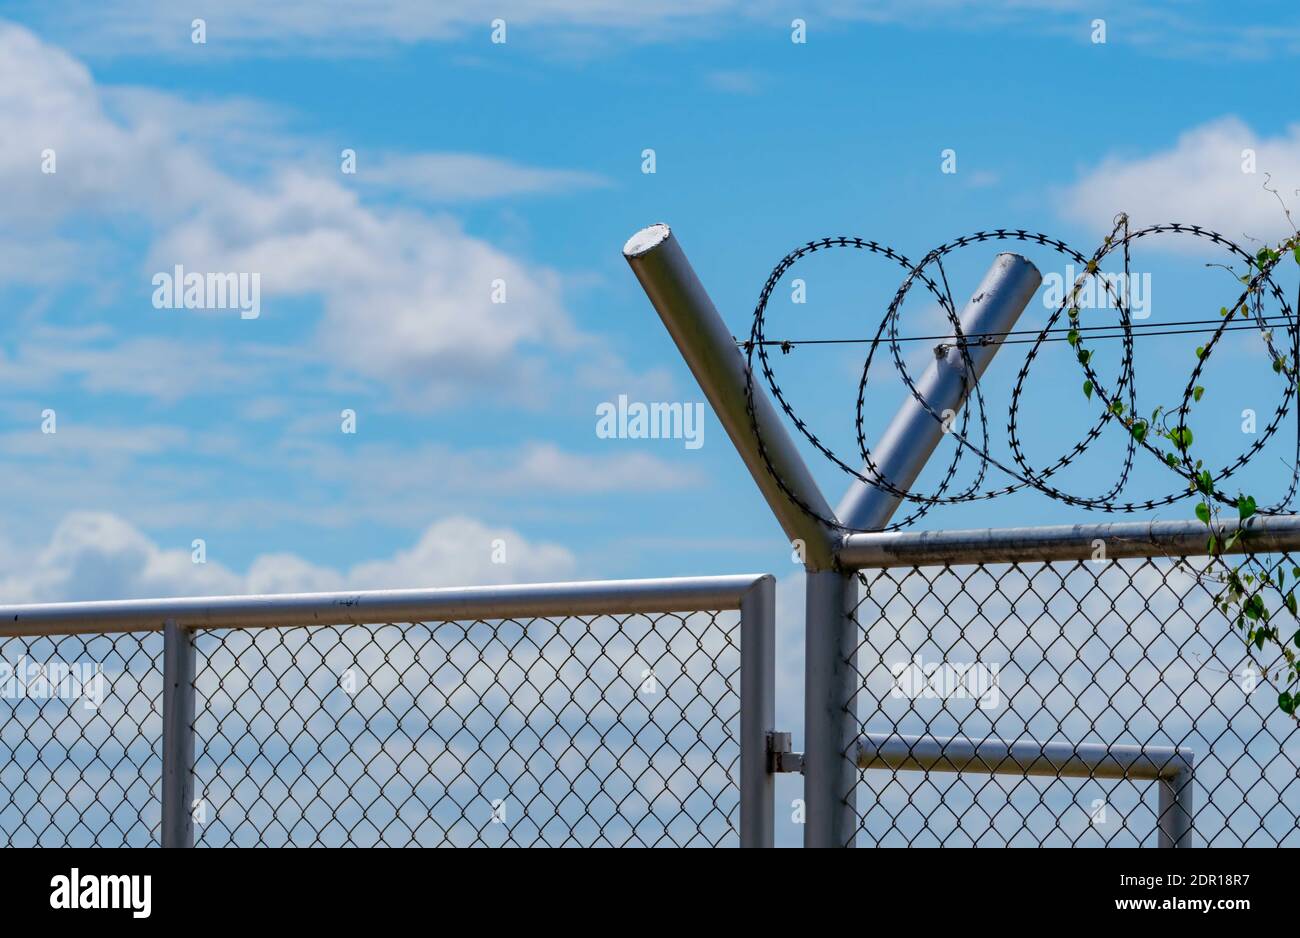 Prison Security Fence. Barbed Wire Security Fence. Razor Wire Jail Fence. Barrier Border. Boundary Stock Photo